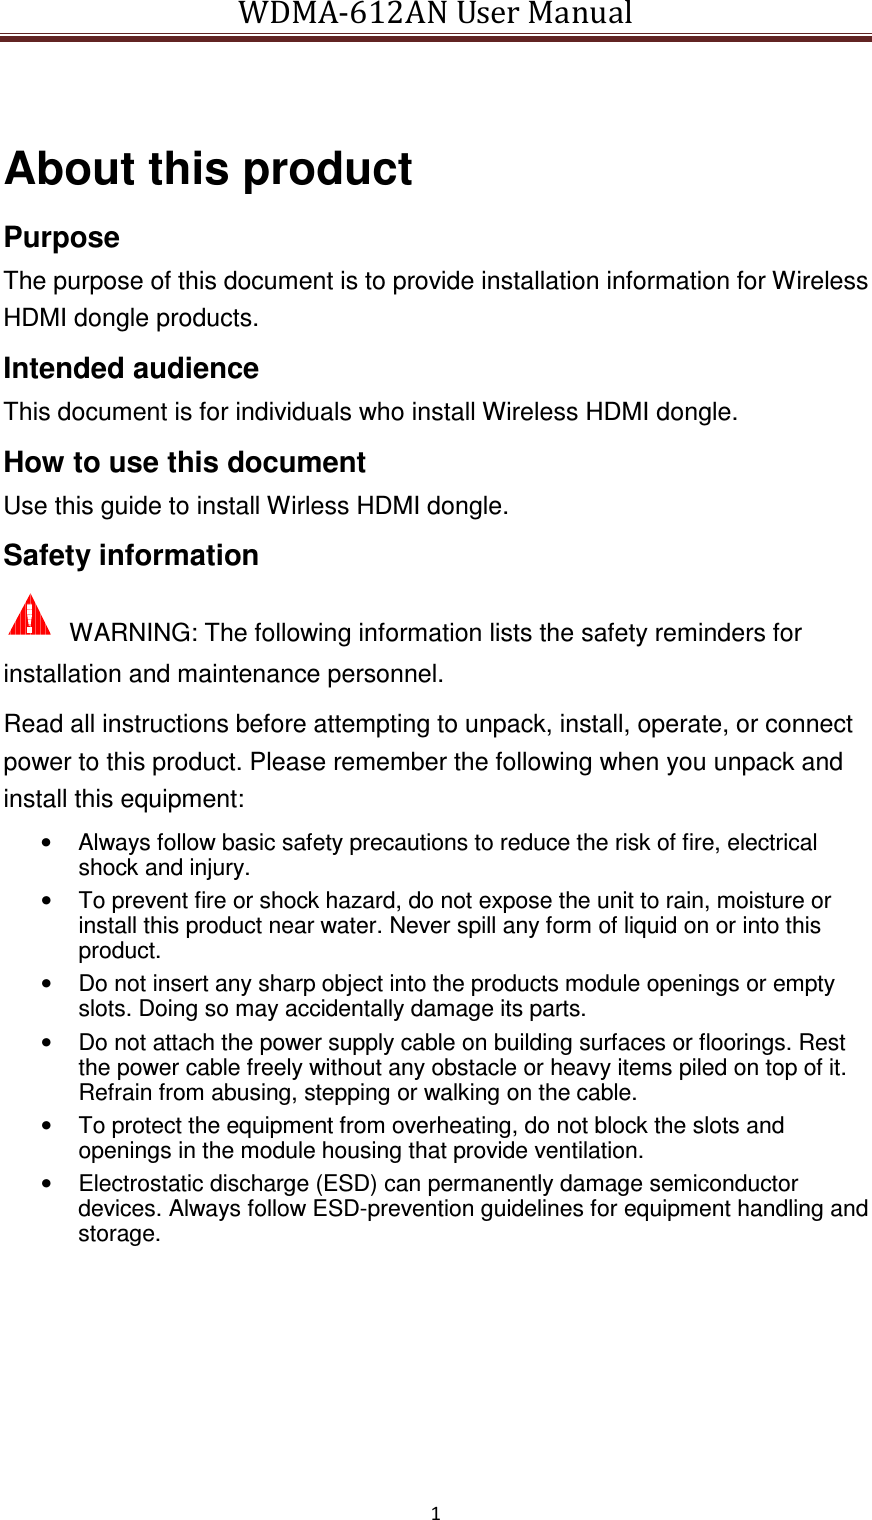 WDMA-612AN User Manual   1   About this product Purpose The purpose of this document is to provide installation information for Wireless HDMI dongle products. Intended audience This document is for individuals who install Wireless HDMI dongle. How to use this document Use this guide to install Wirless HDMI dongle. Safety information   WARNING: The following information lists the safety reminders for installation and maintenance personnel. Read all instructions before attempting to unpack, install, operate, or connect power to this product. Please remember the following when you unpack and install this equipment: •  Always follow basic safety precautions to reduce the risk of fire, electrical shock and injury. •  To prevent fire or shock hazard, do not expose the unit to rain, moisture or install this product near water. Never spill any form of liquid on or into this product. •  Do not insert any sharp object into the products module openings or empty slots. Doing so may accidentally damage its parts. •  Do not attach the power supply cable on building surfaces or floorings. Rest the power cable freely without any obstacle or heavy items piled on top of it. Refrain from abusing, stepping or walking on the cable. •  To protect the equipment from overheating, do not block the slots and openings in the module housing that provide ventilation. •  Electrostatic discharge (ESD) can permanently damage semiconductor devices. Always follow ESD-prevention guidelines for equipment handling and storage. 